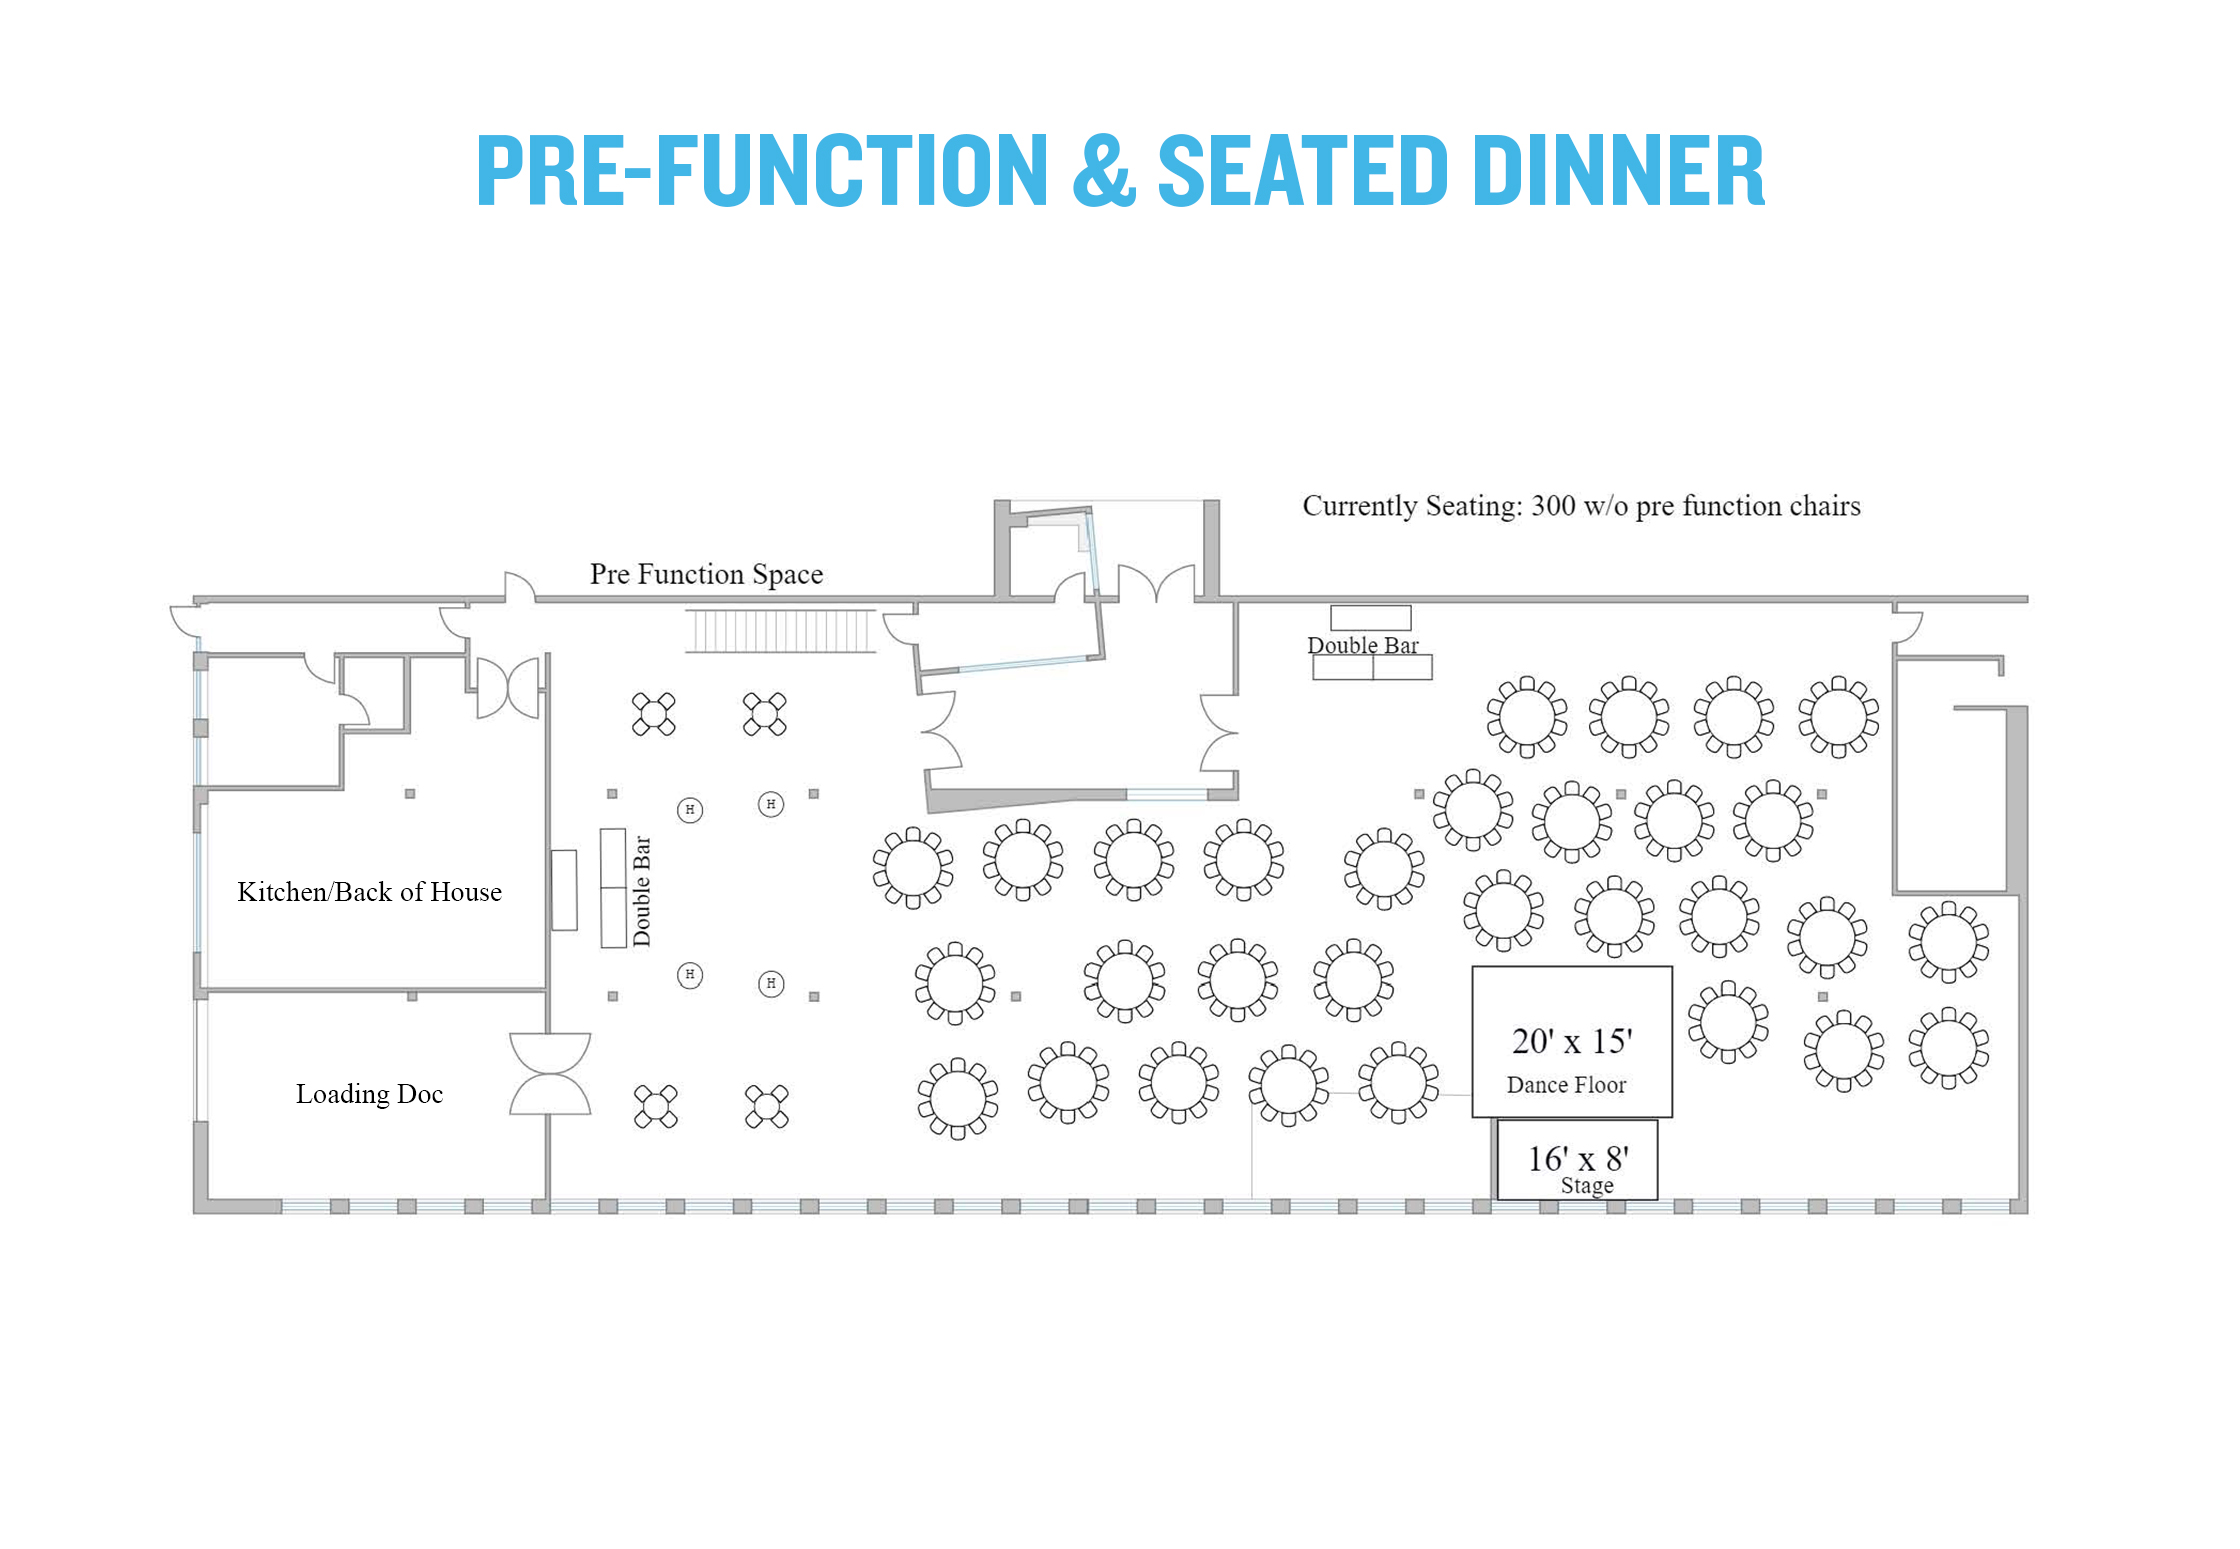 This layout seats 300 guests, includes two separate double bars, a dance floor and stage.